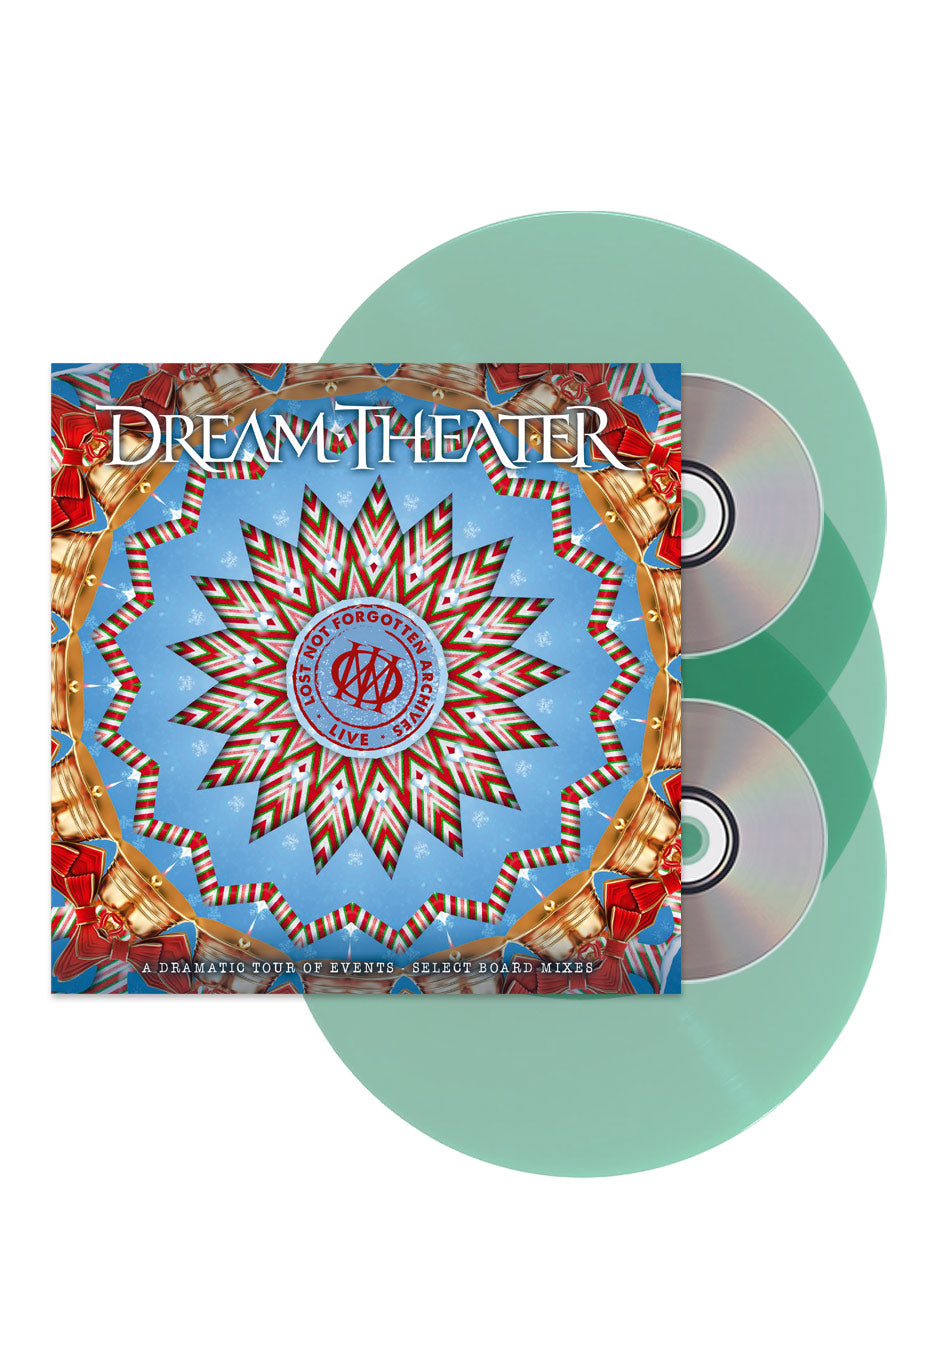 Dream Theater - Lost Not Forgotten Archives: A Dramatic Tour Of Events - Select Board Mixes - Transparent Coke Bottle Green Colored 3 Vinyl + 2 CD